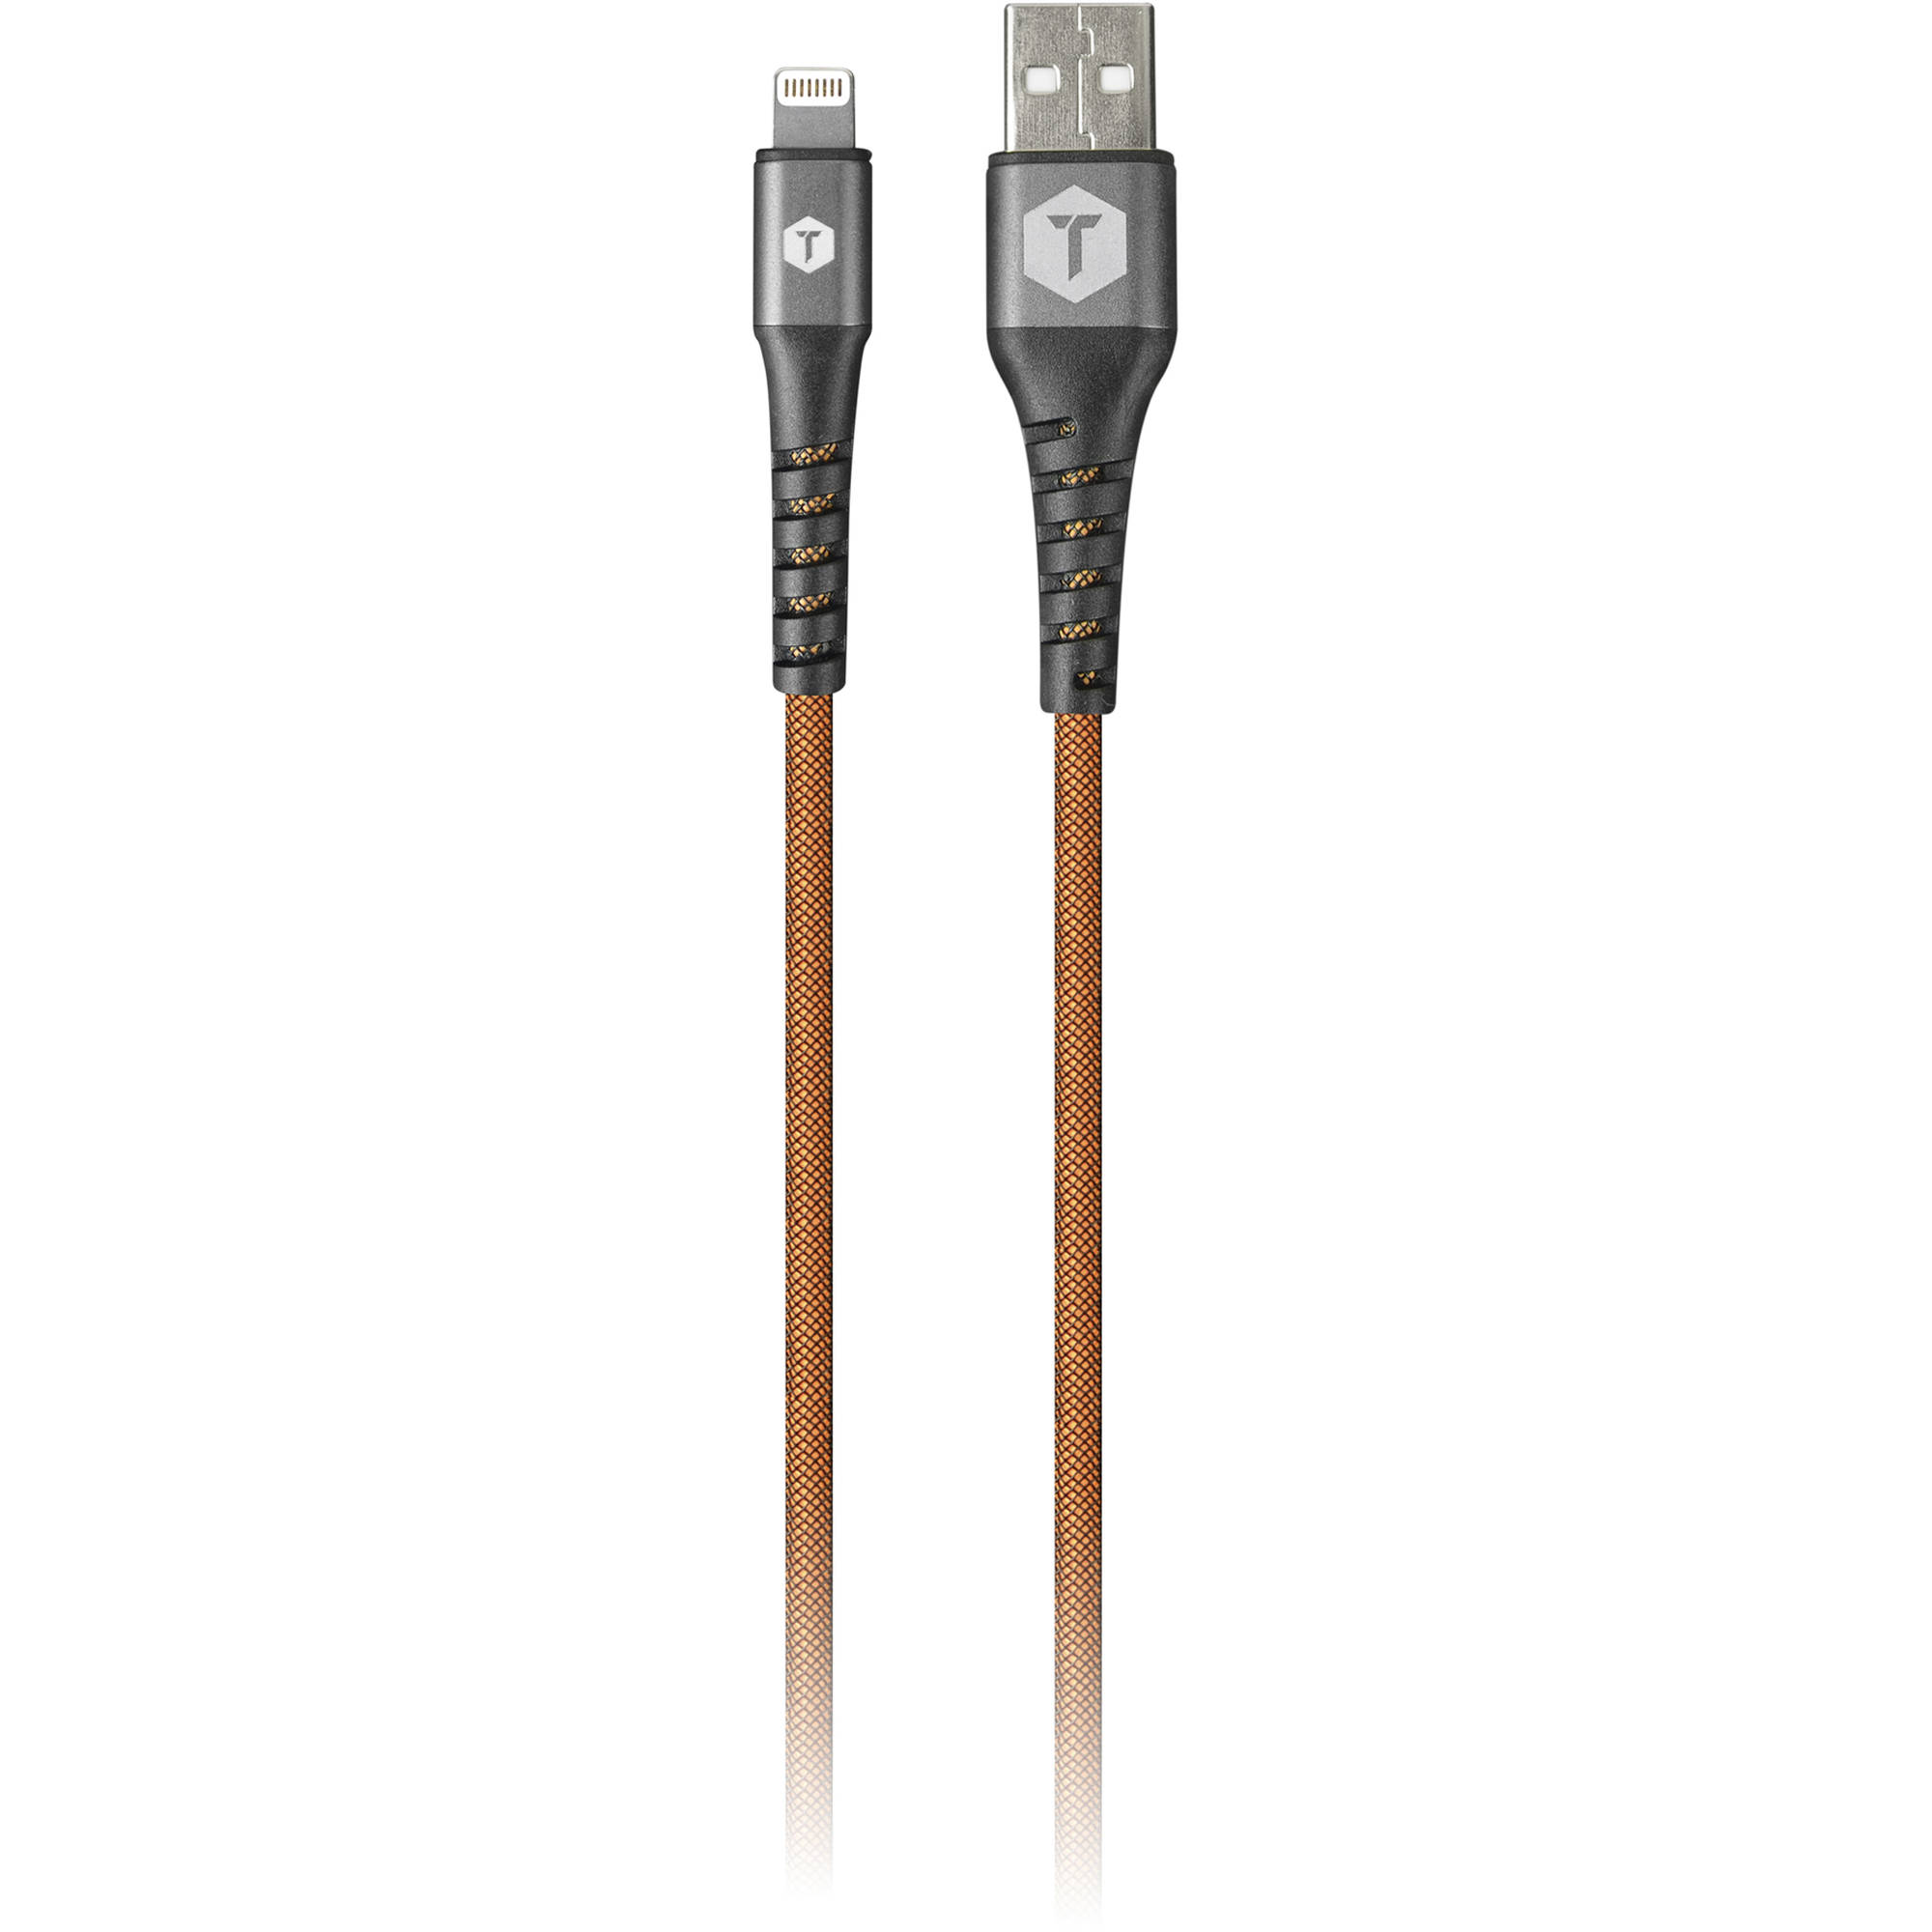 small usb cable